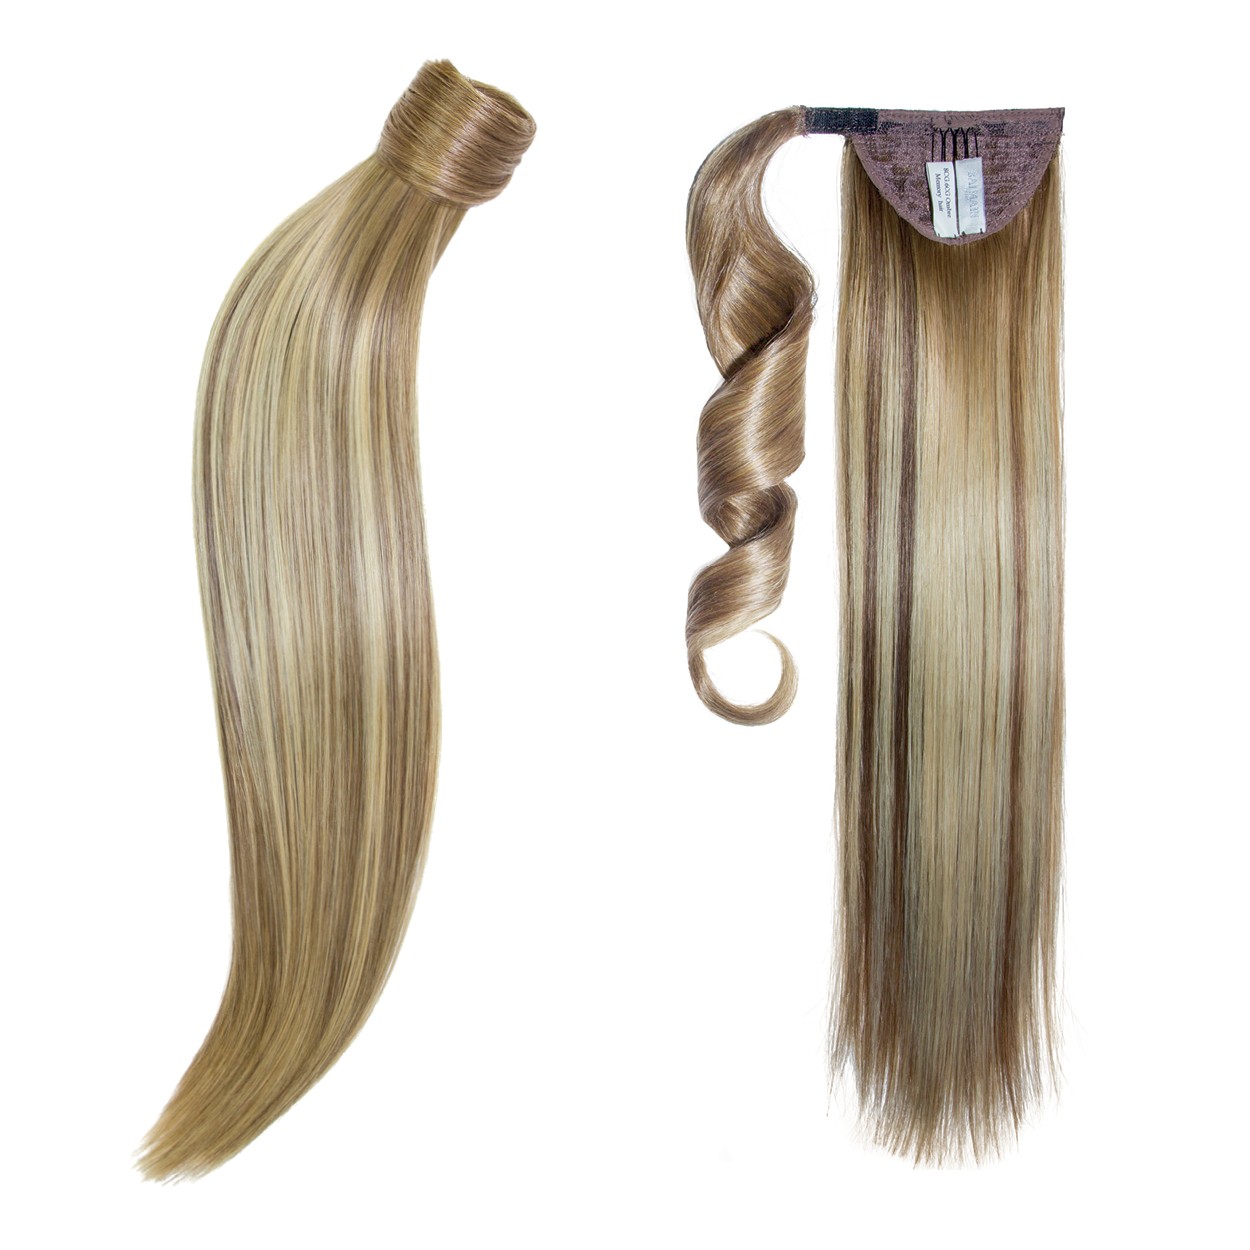 hairextensions - Hairextensions